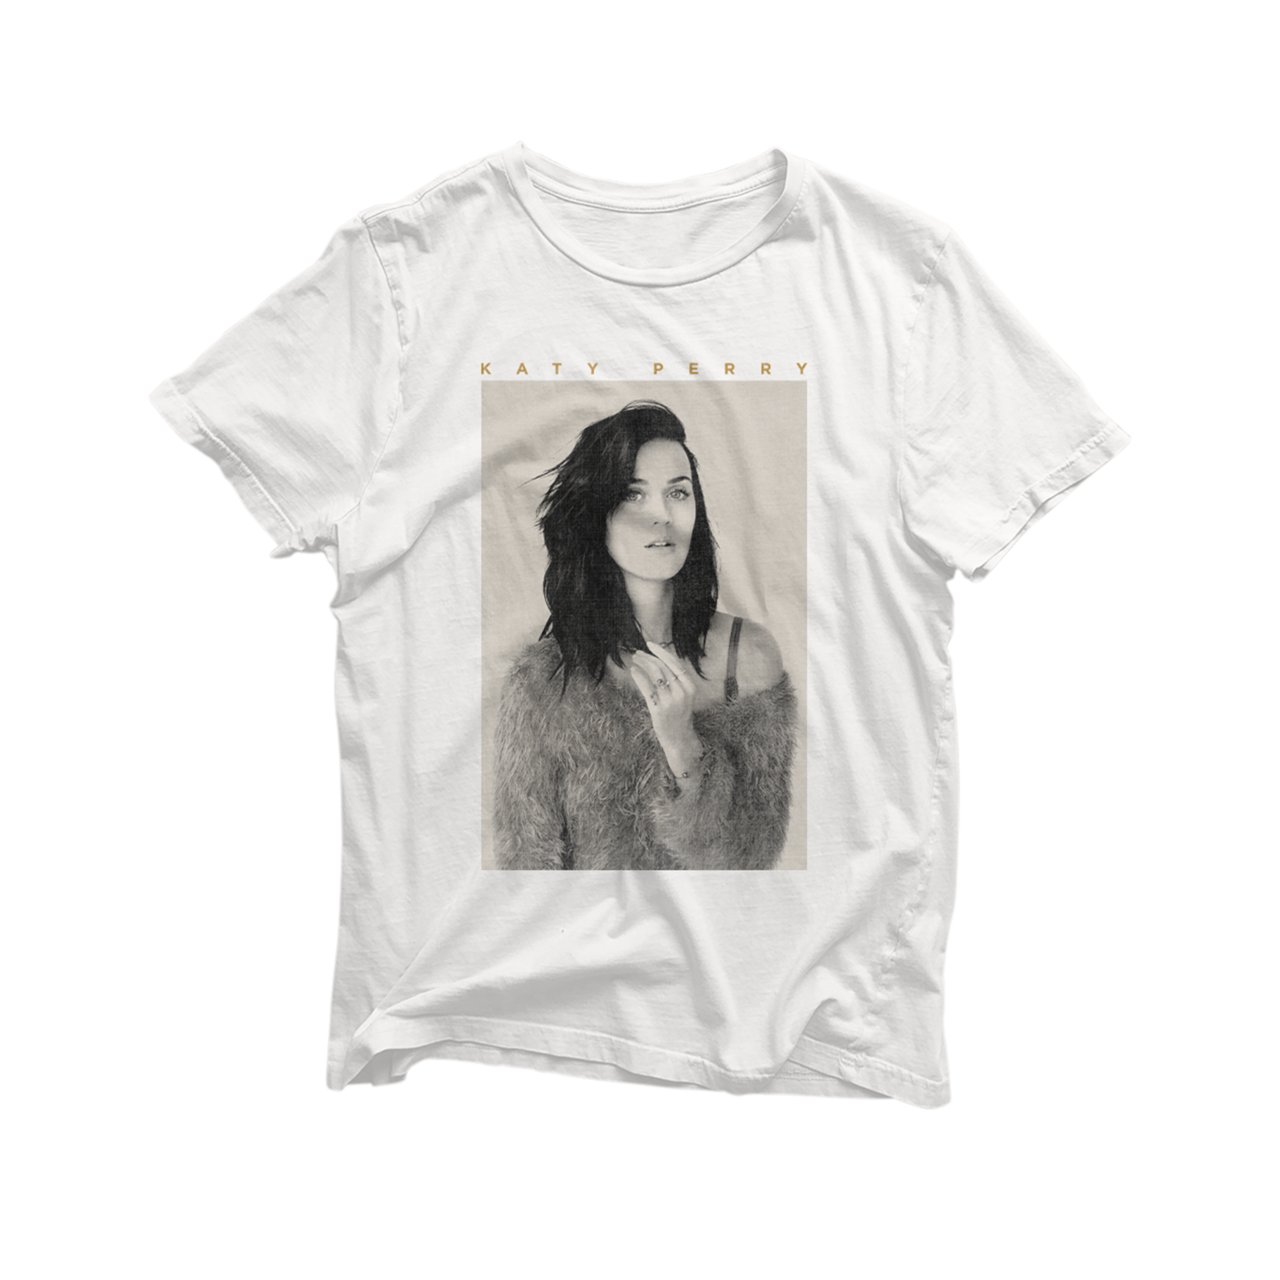 Katy Perry - This Moment T-Shirt